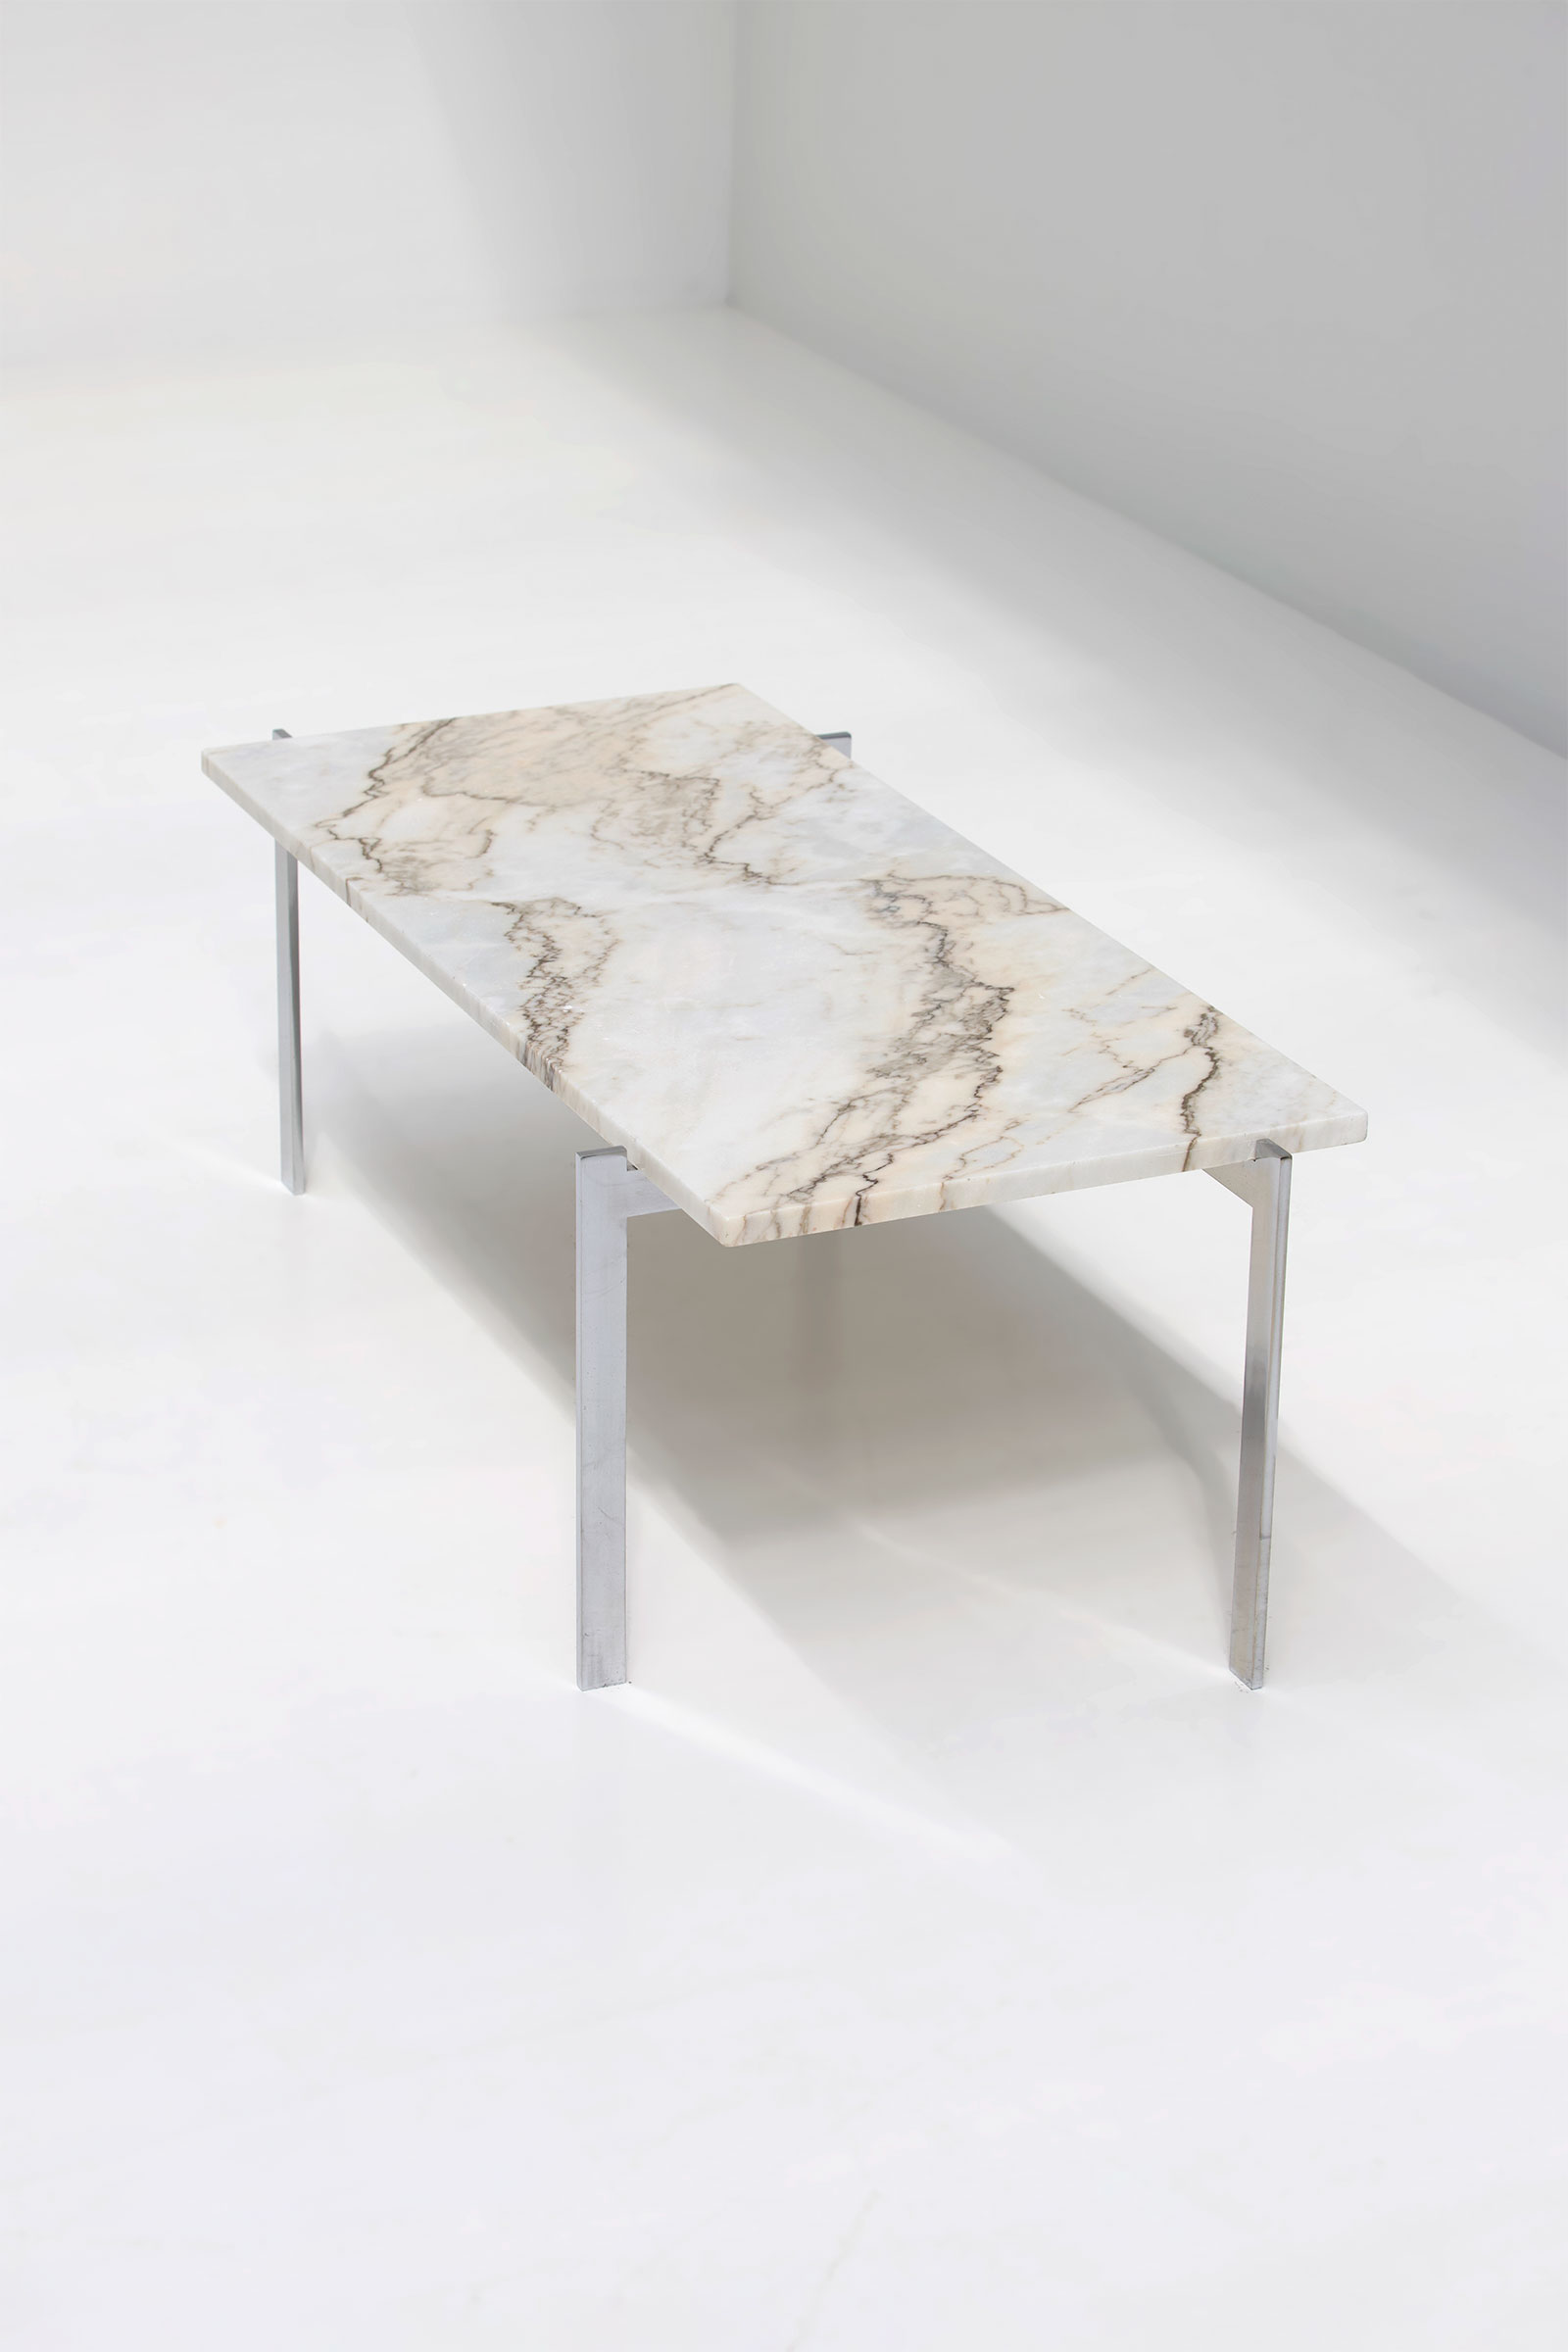 1960s Marble & Chrome Coffee Table image 1